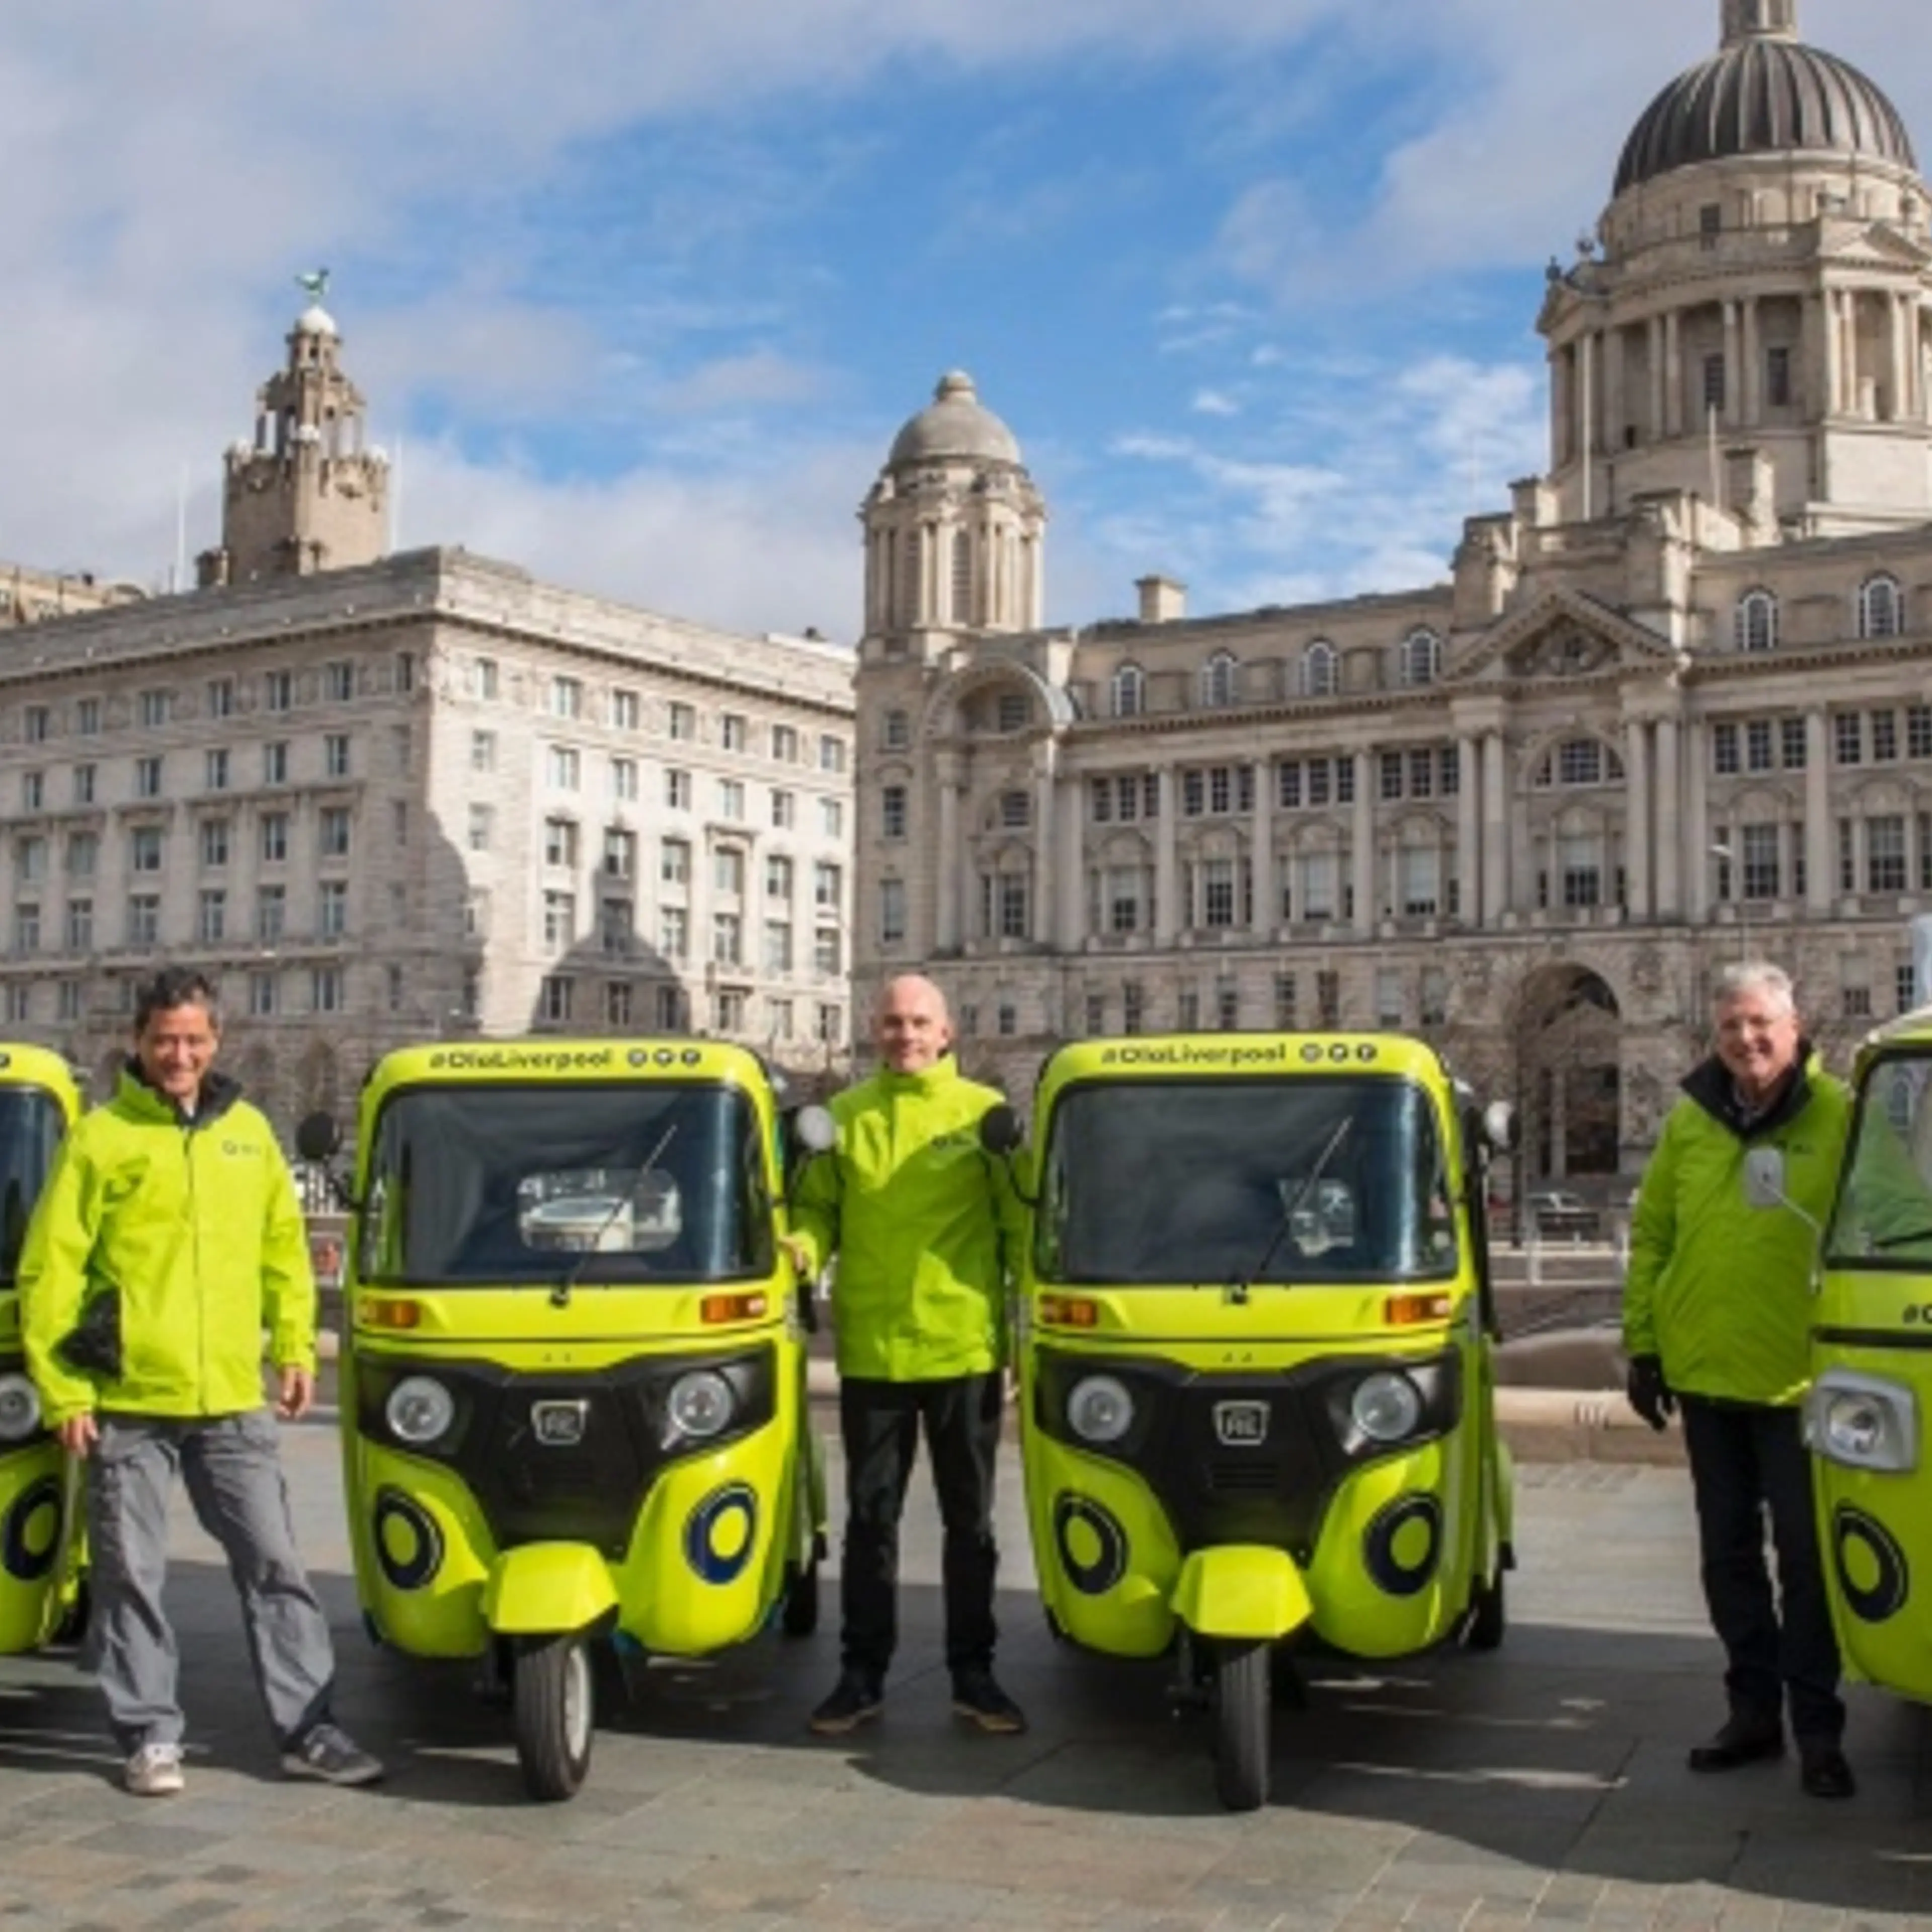 Ola e-rickshaws are all over Liverpool, but the British will need to wait before they actually can hail one